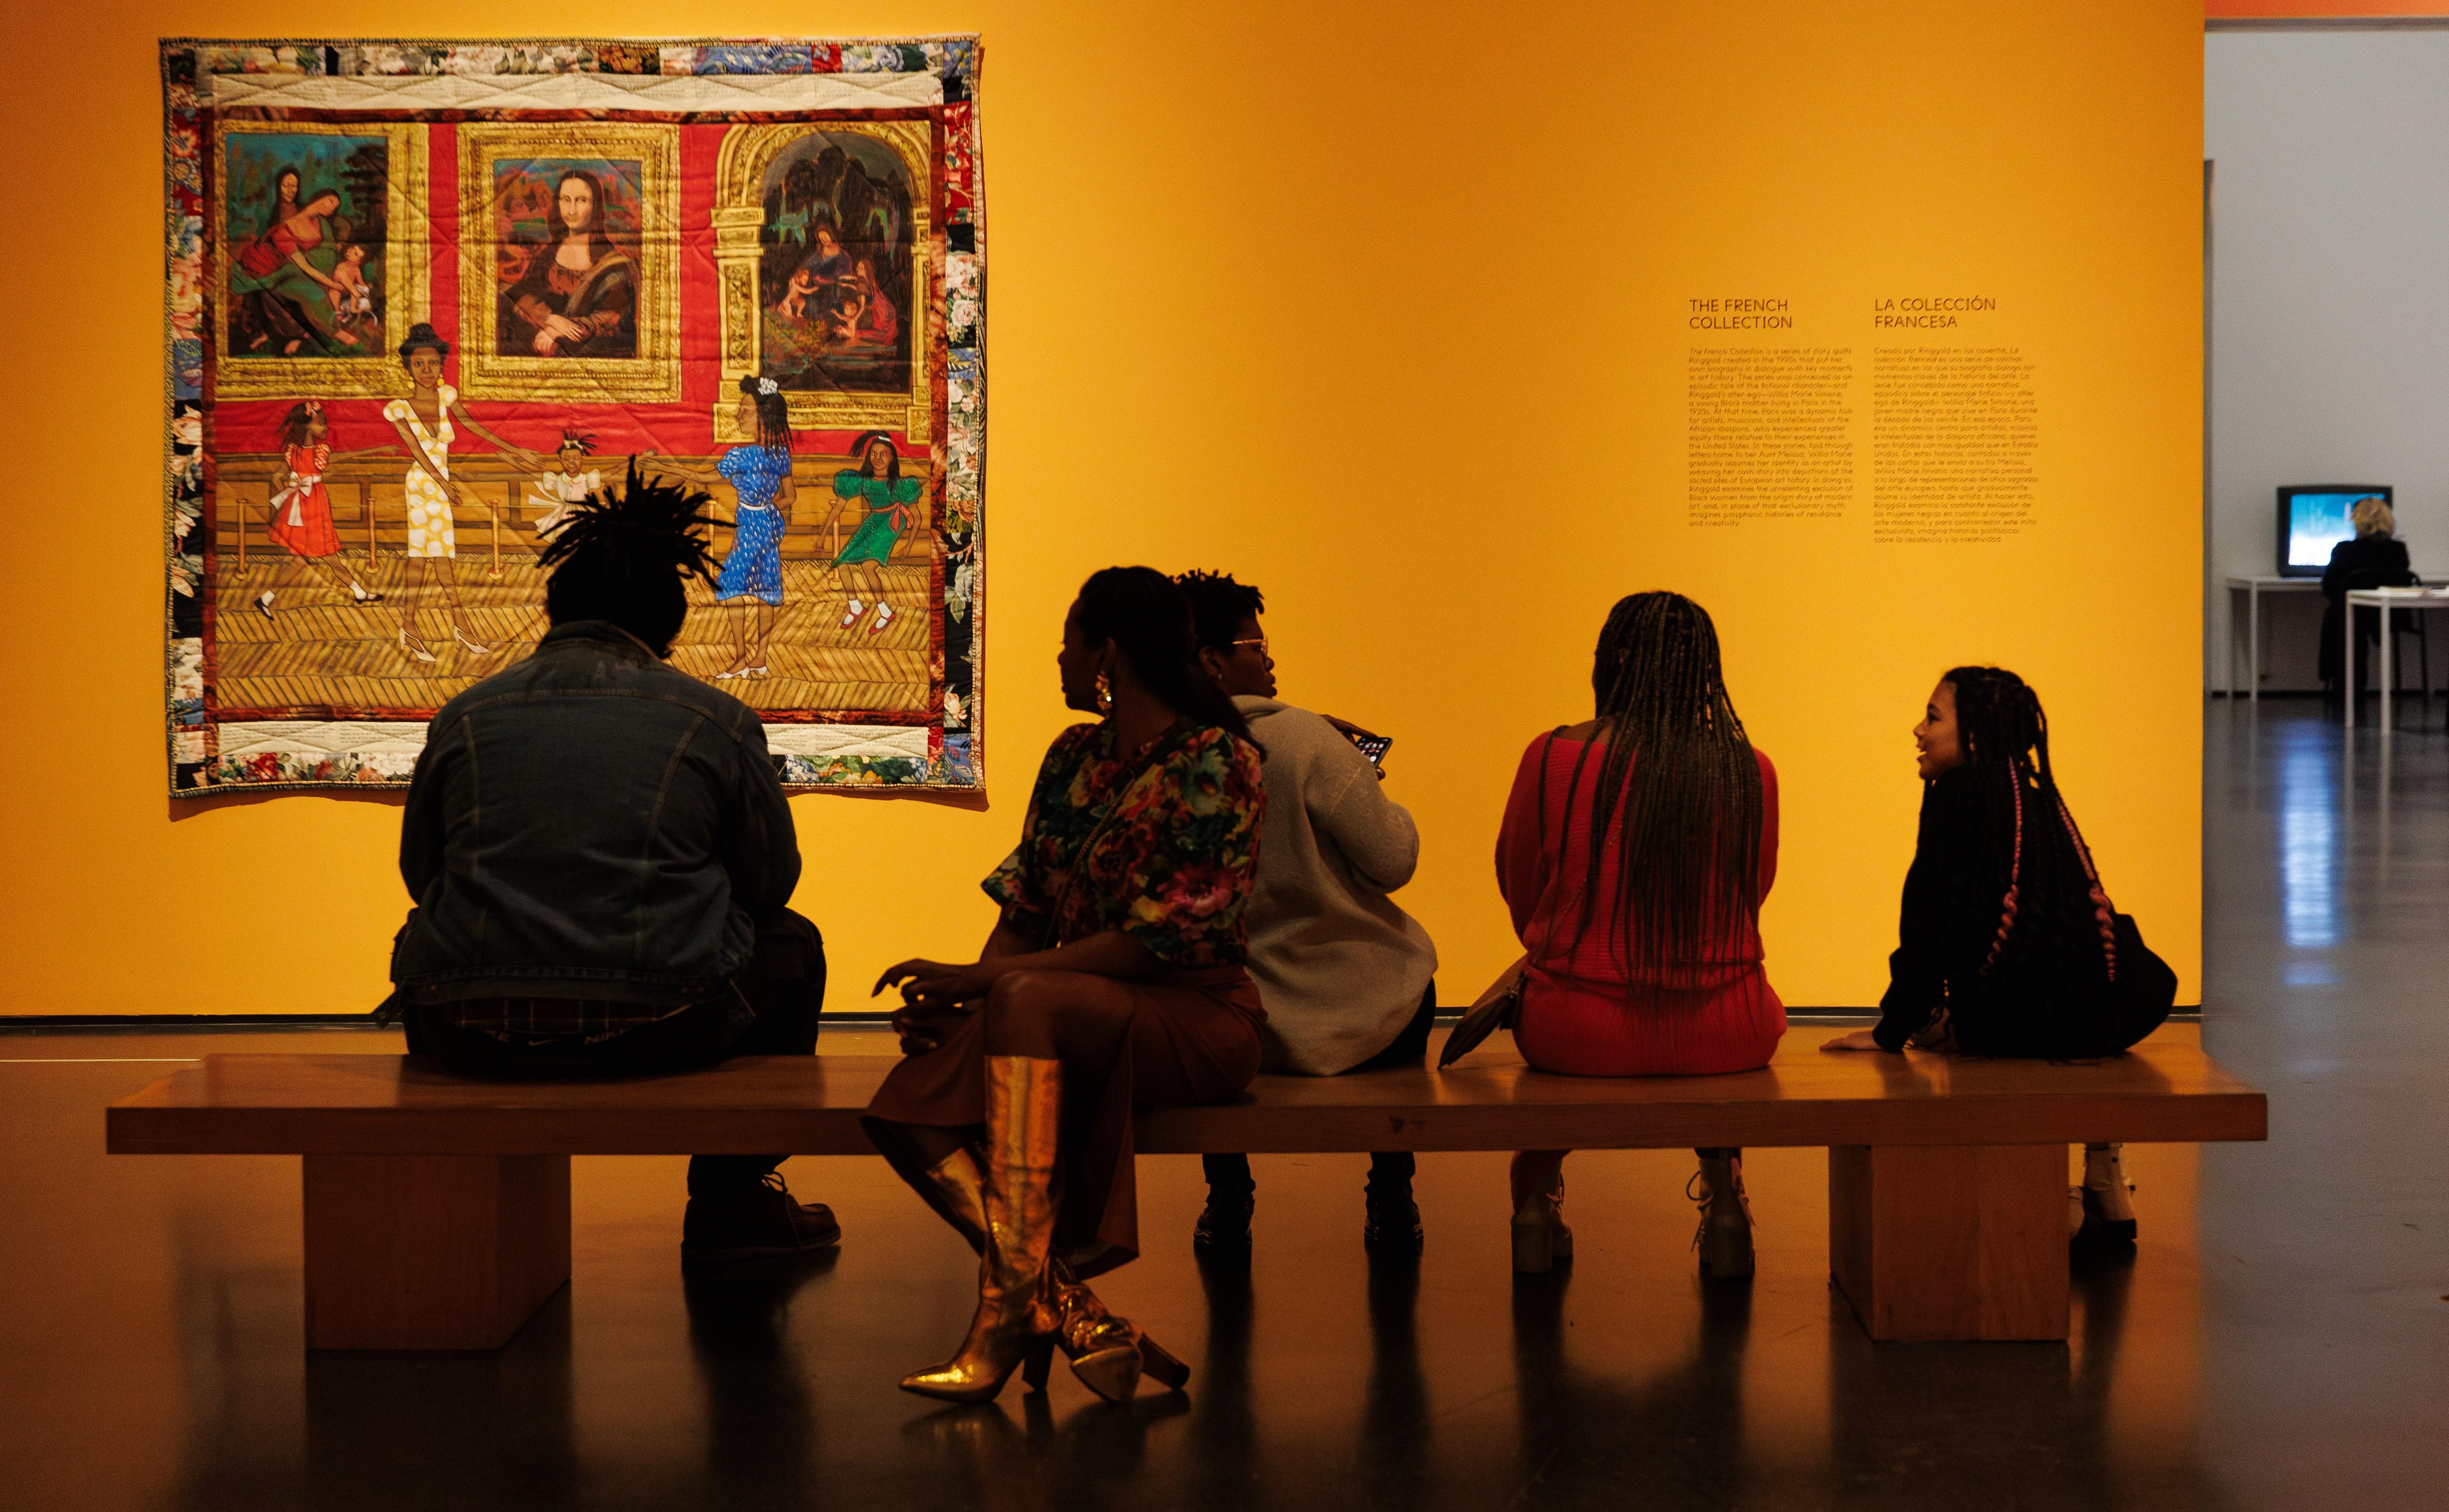 Five people sit on a long wooden bench in an orange gallery space with a quilt hung on the wall.